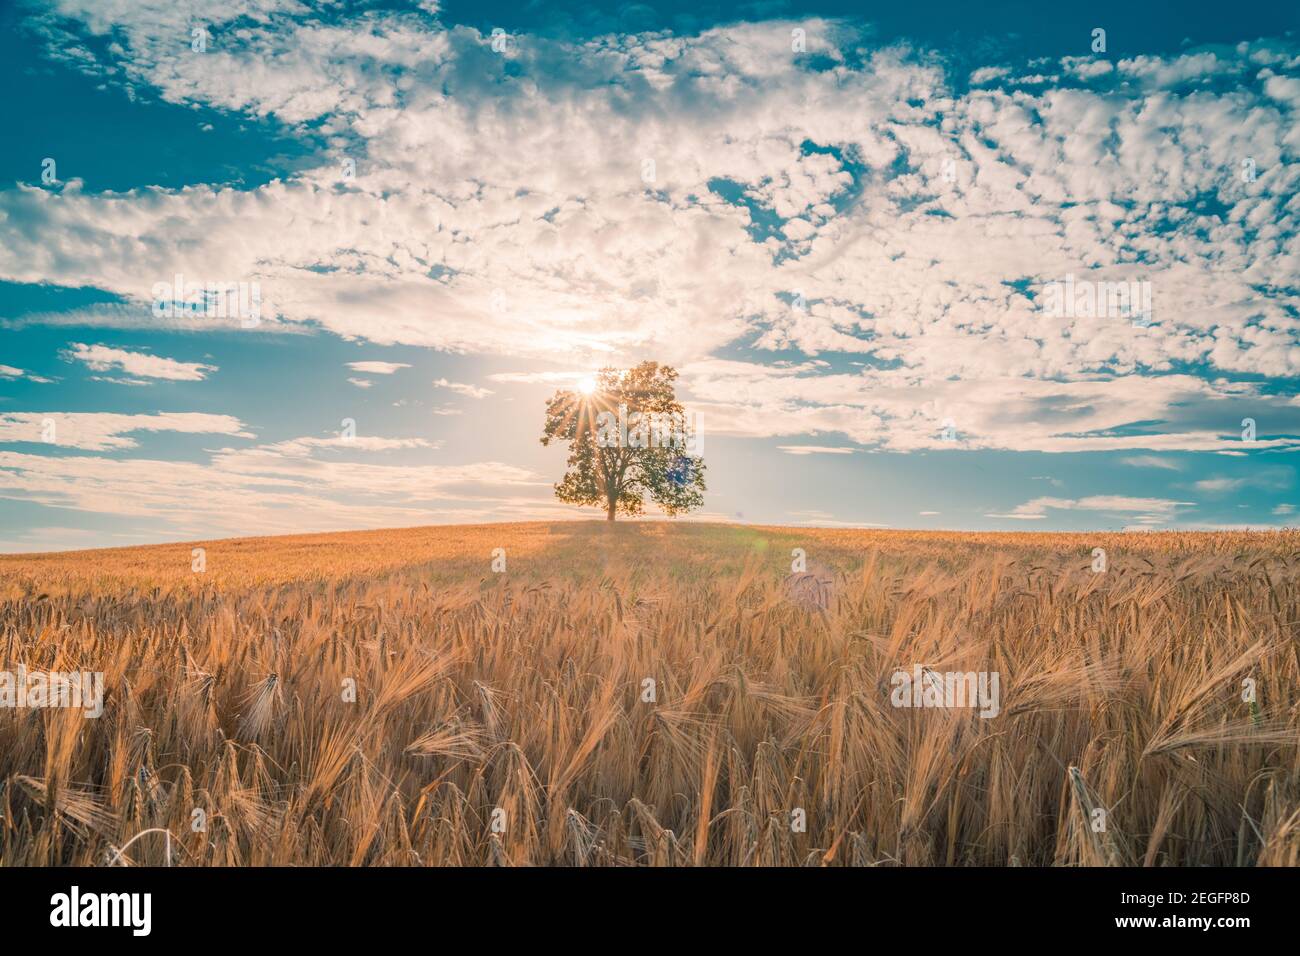 Solitary Tree in Field of Wheat and Barley in Summer Landscape under Blue Sky Stock Photo